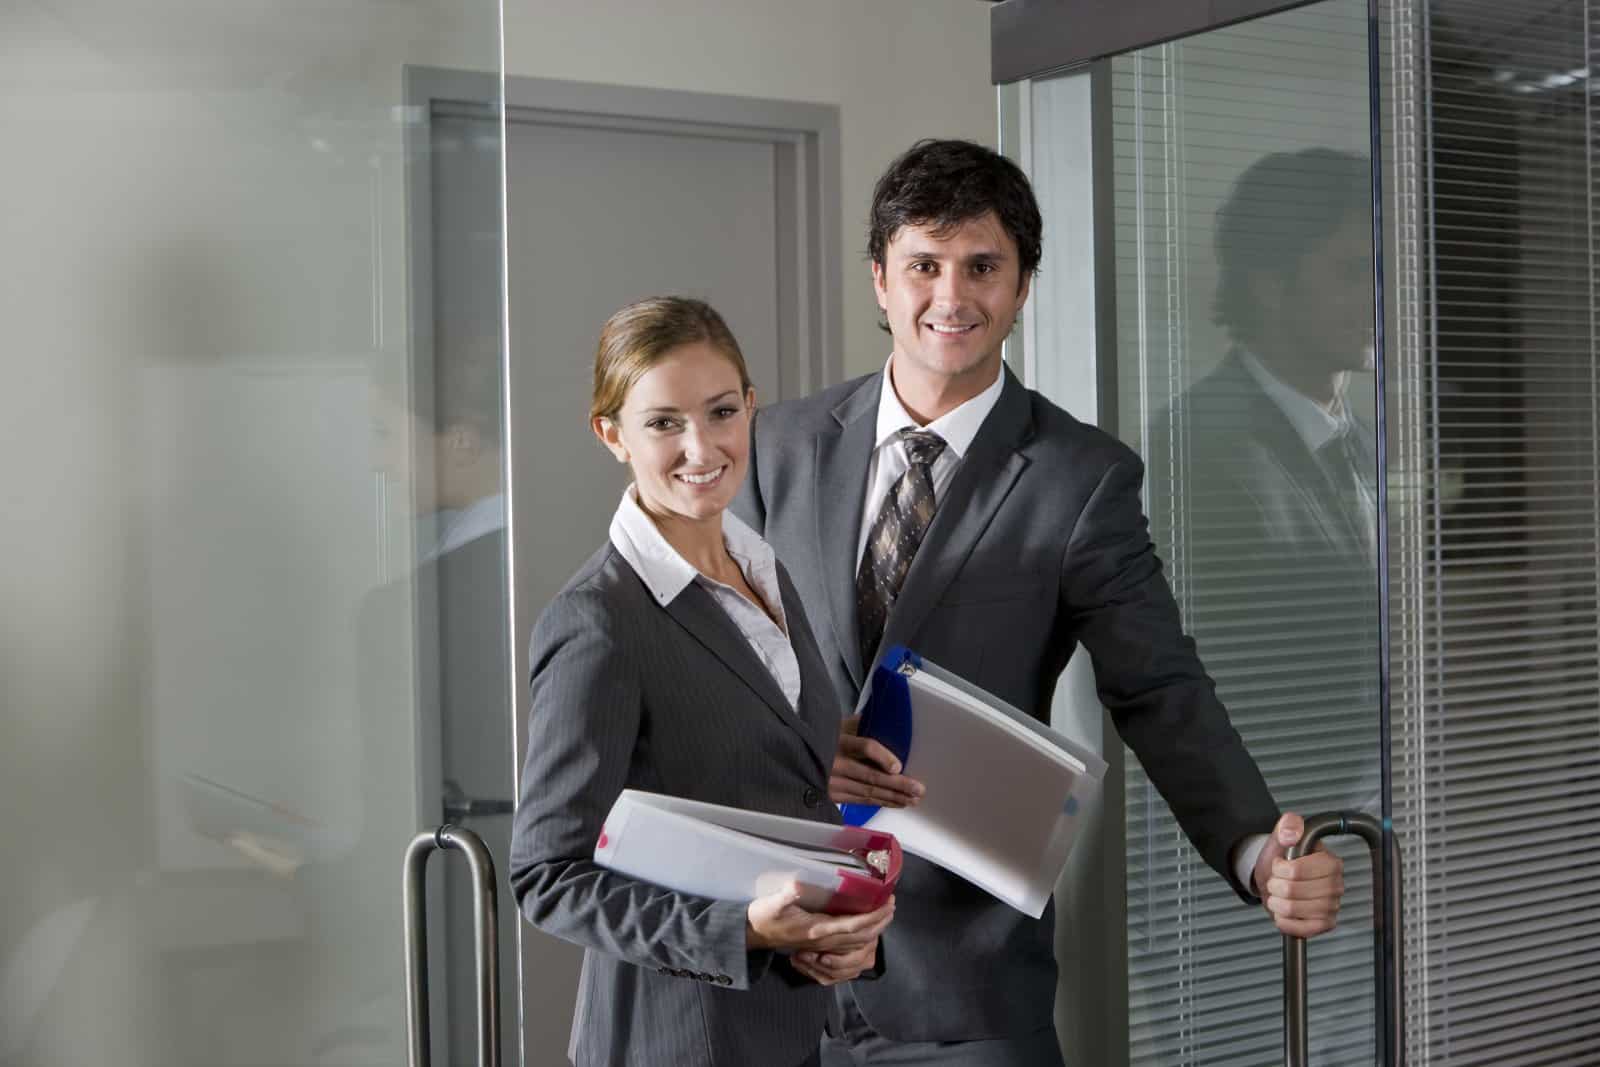 <p class="wp-caption-text">Image Credit: Shutterstock / Golden Pixels LLC</p>  <p>Diplomats who live abroad representing their country, working in embassies or consulates. The selection process is rigorous, involving exams and security clearances, but the career offers a unique look into international relations.</p>